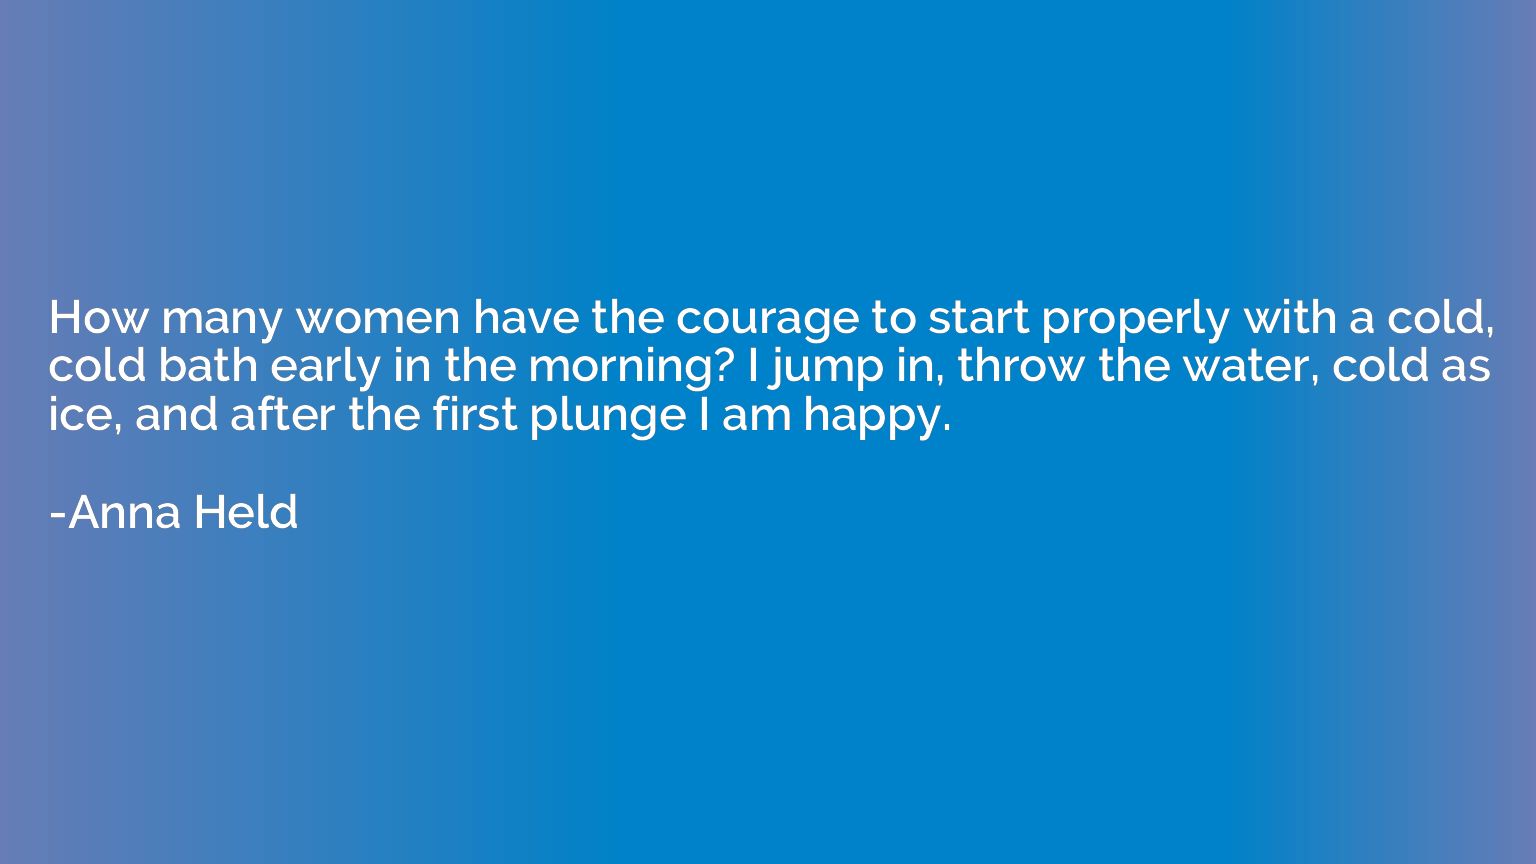 How many women have the courage to start properly with a col